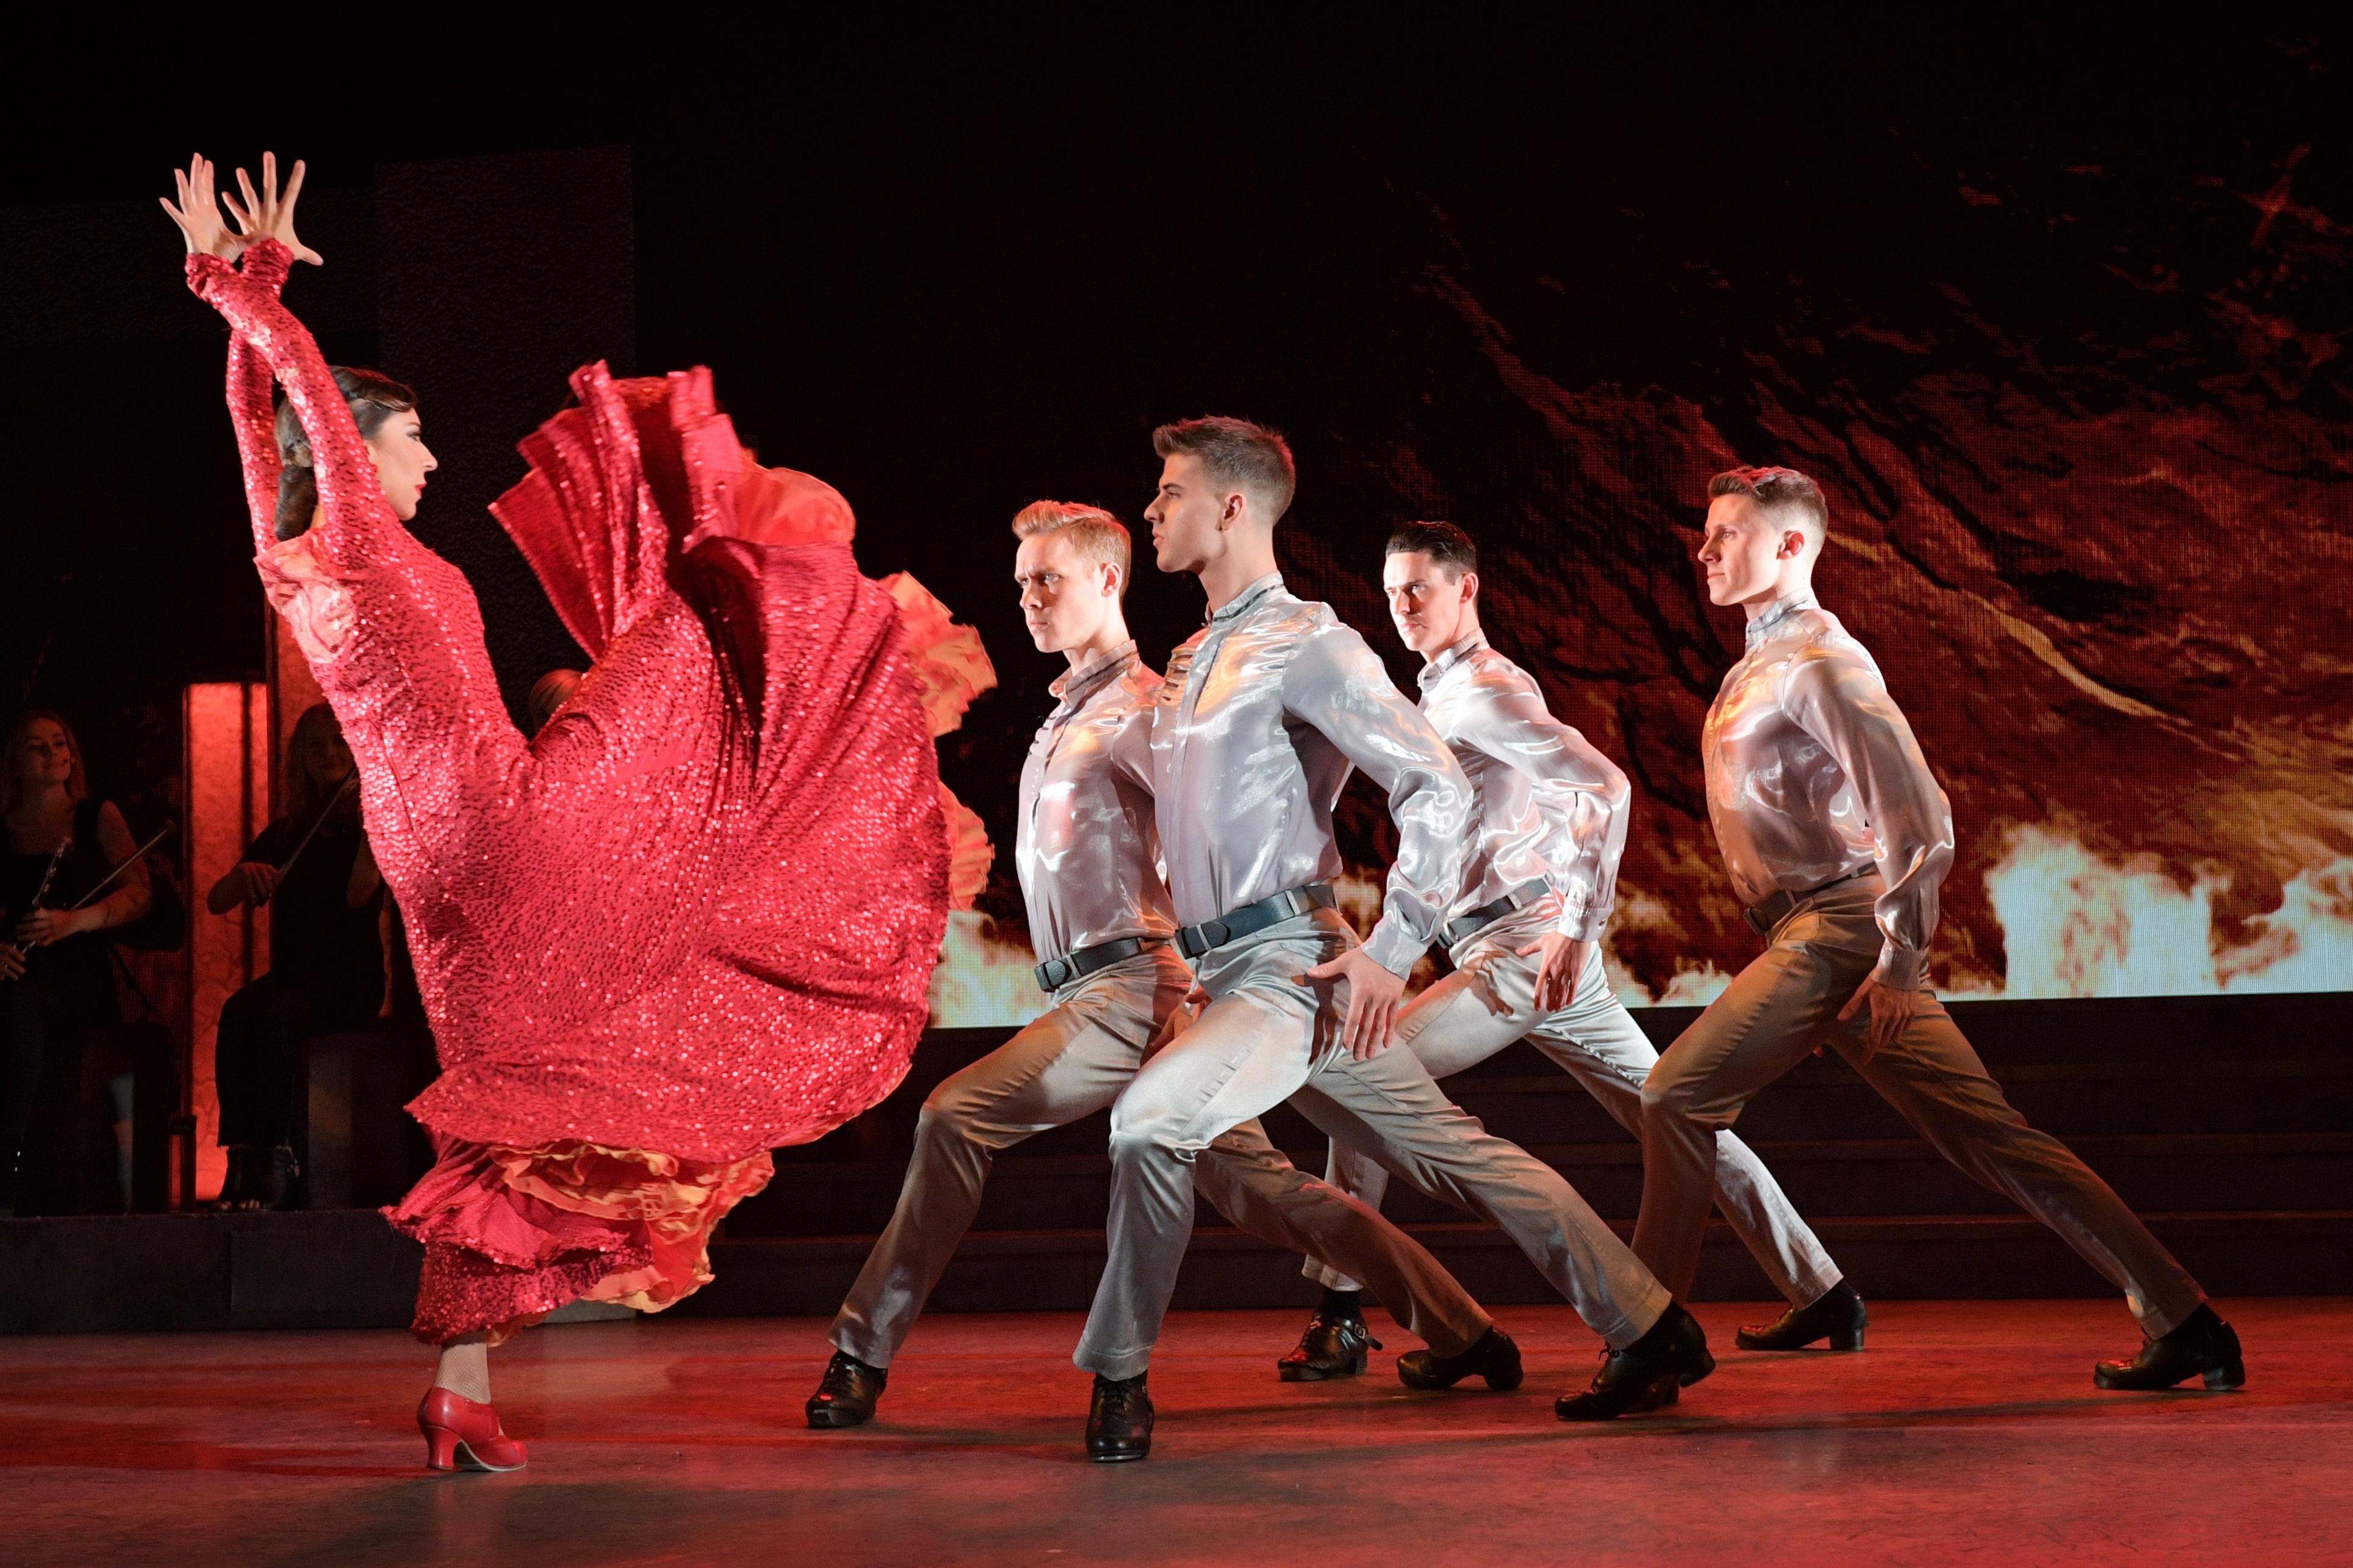 image from Firedance, a flamenco sequence with a woman in a red dress and four men in silver shirts